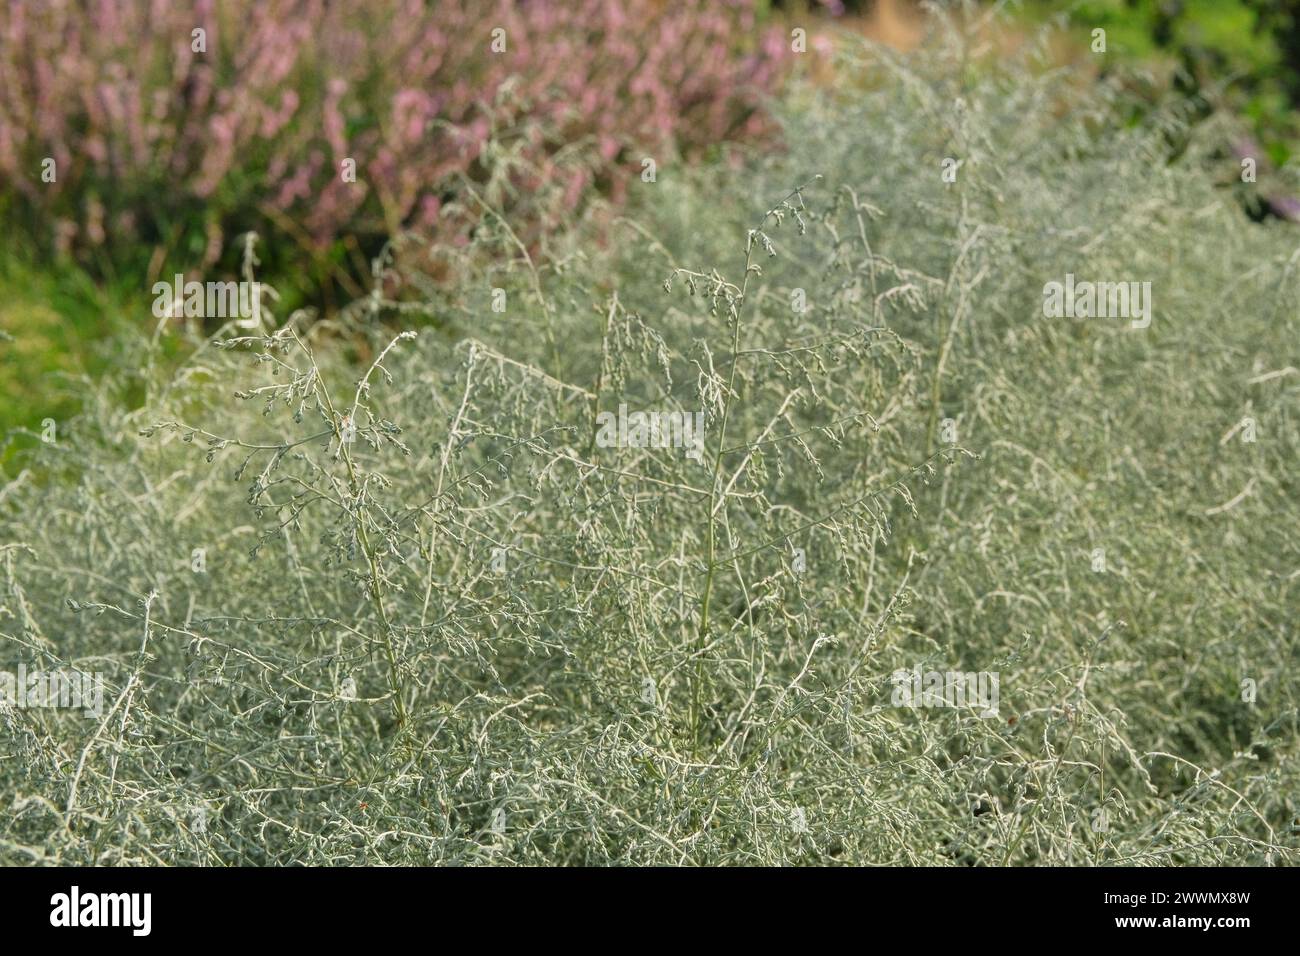 Asparagus albus grow in garden. Evergreen plant is growing outdoors. Growing spices for further use. Farming and harvesting. Stock Photo